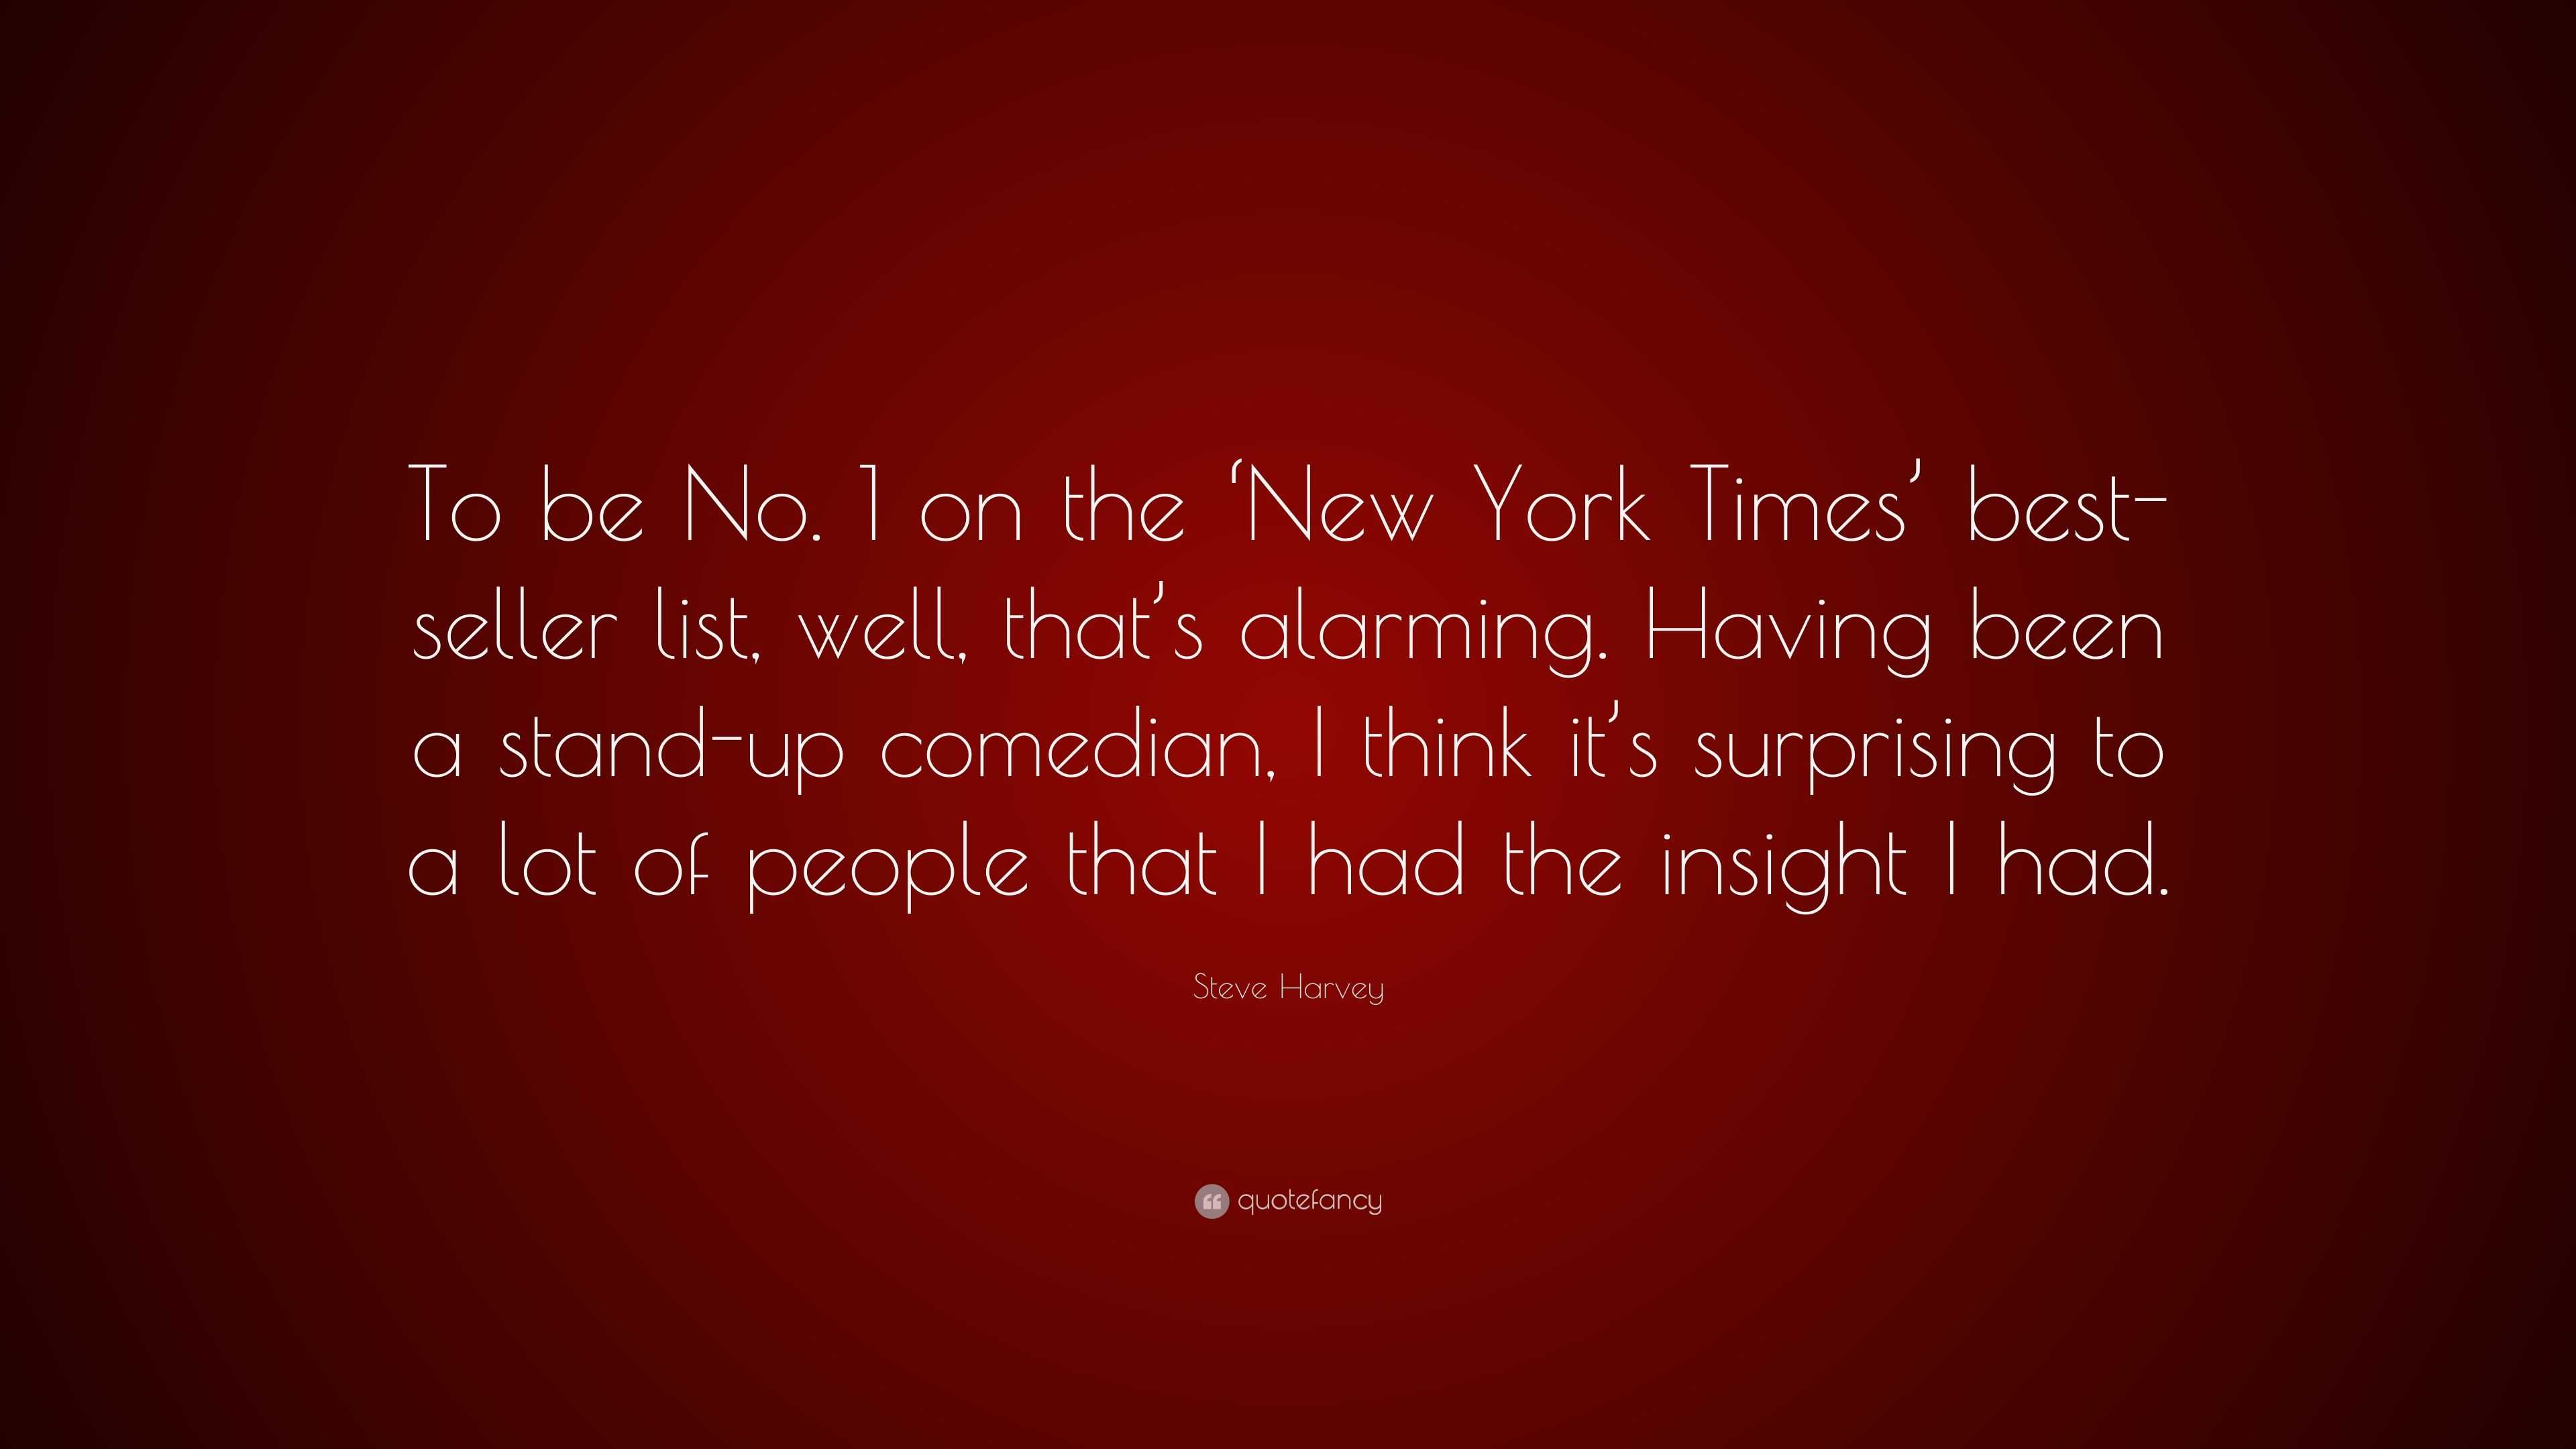 Steve Harvey Quote: “To be No. 1 on the 'New York Times' best